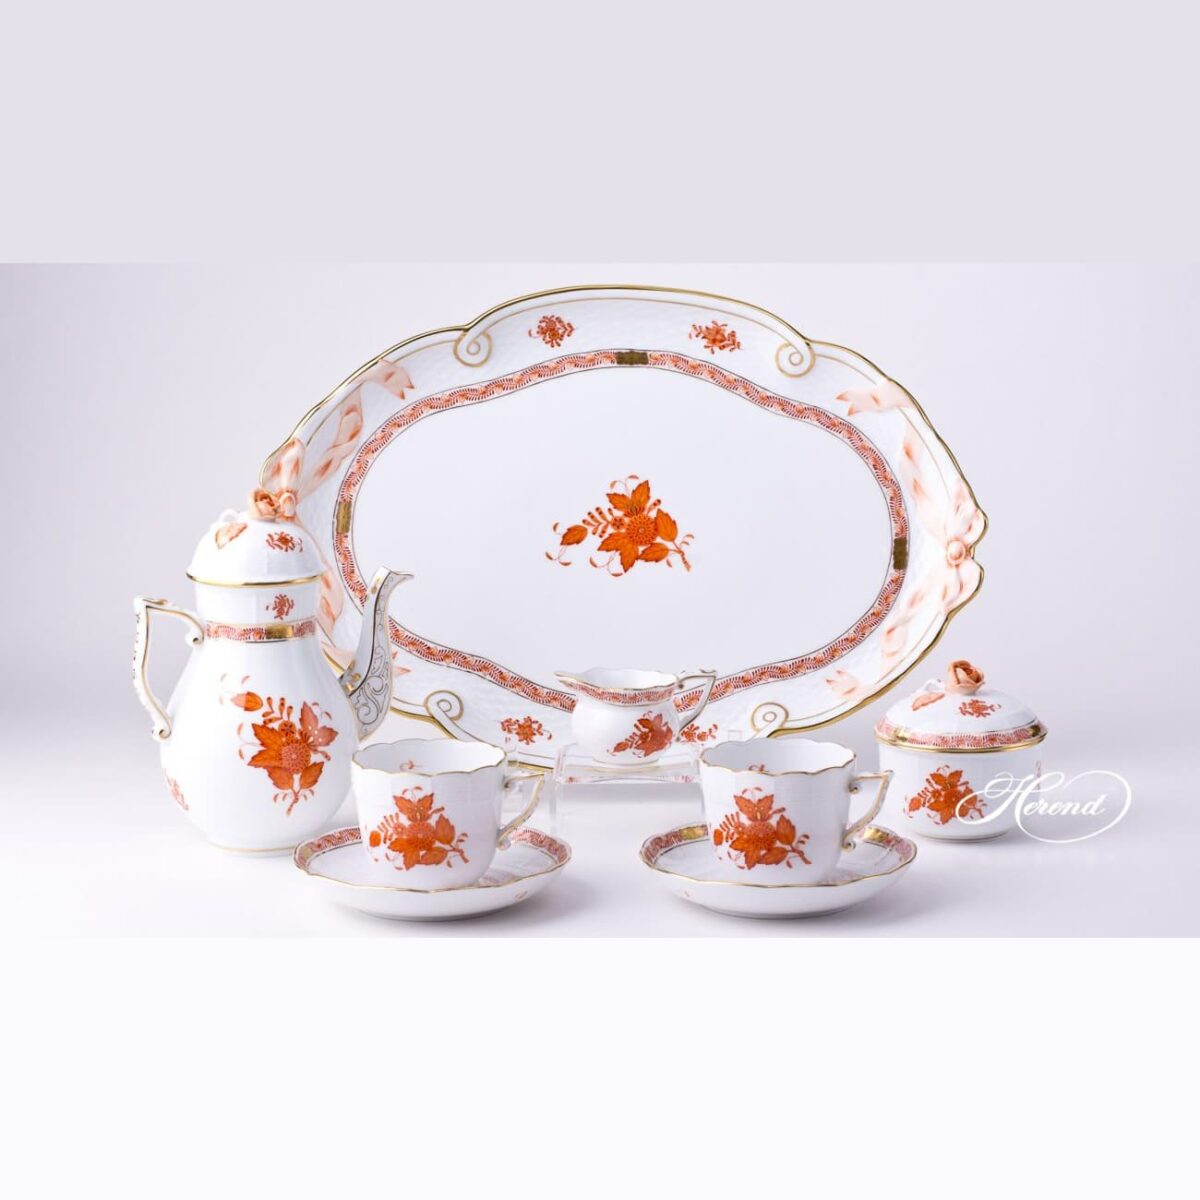 Herend-Espresso-Set-Chinese-Bouquet-Rust-Apponyi-Orange-AOG-Herend-Fine-china-2